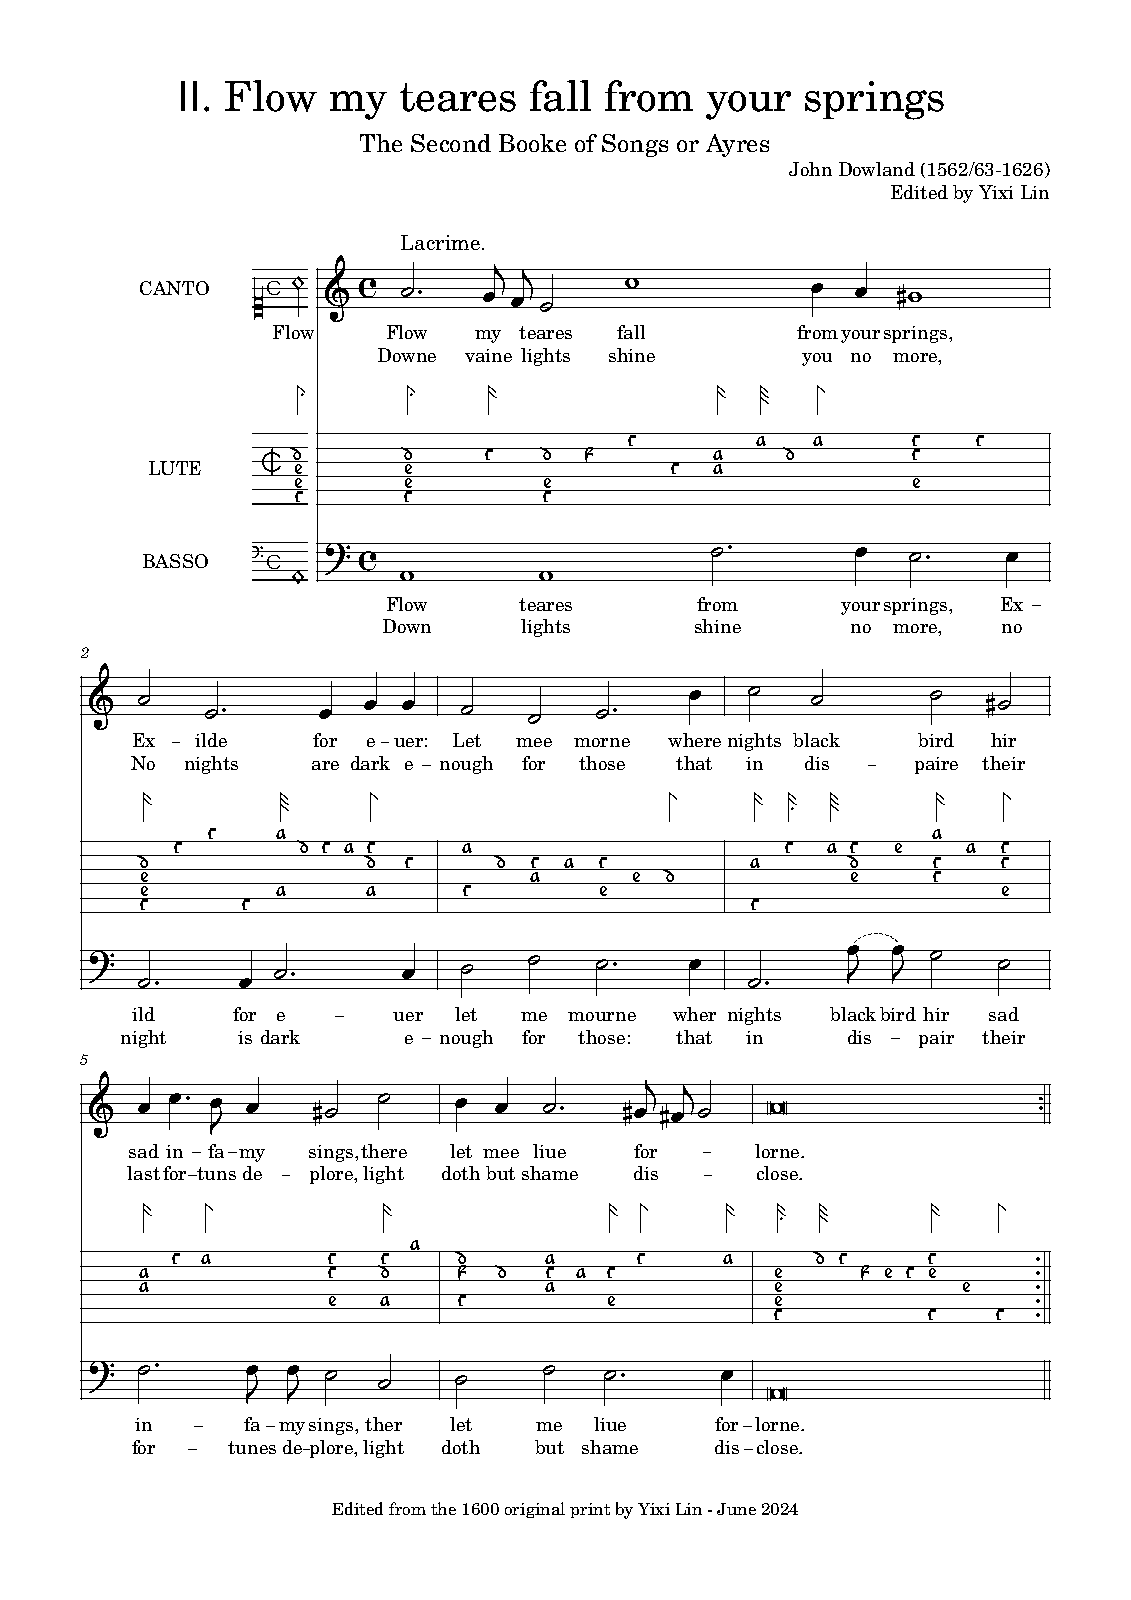 PMLP277931-Flow my teares - Canto+Lute+Basso.pdf